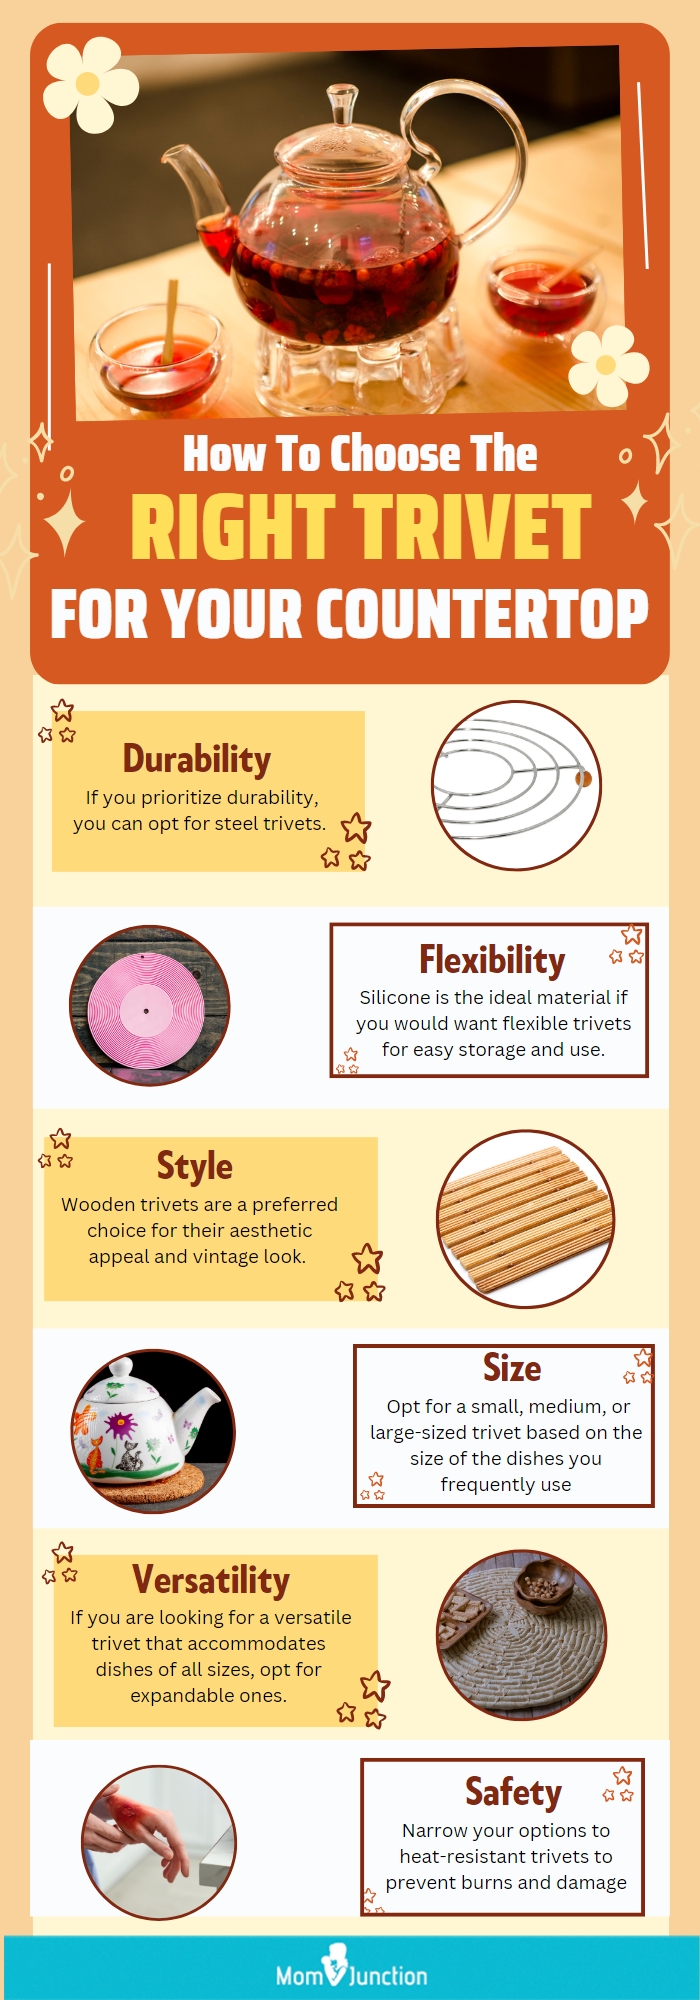 How To Choose The Right Trivet For Your Countertop (infographic)